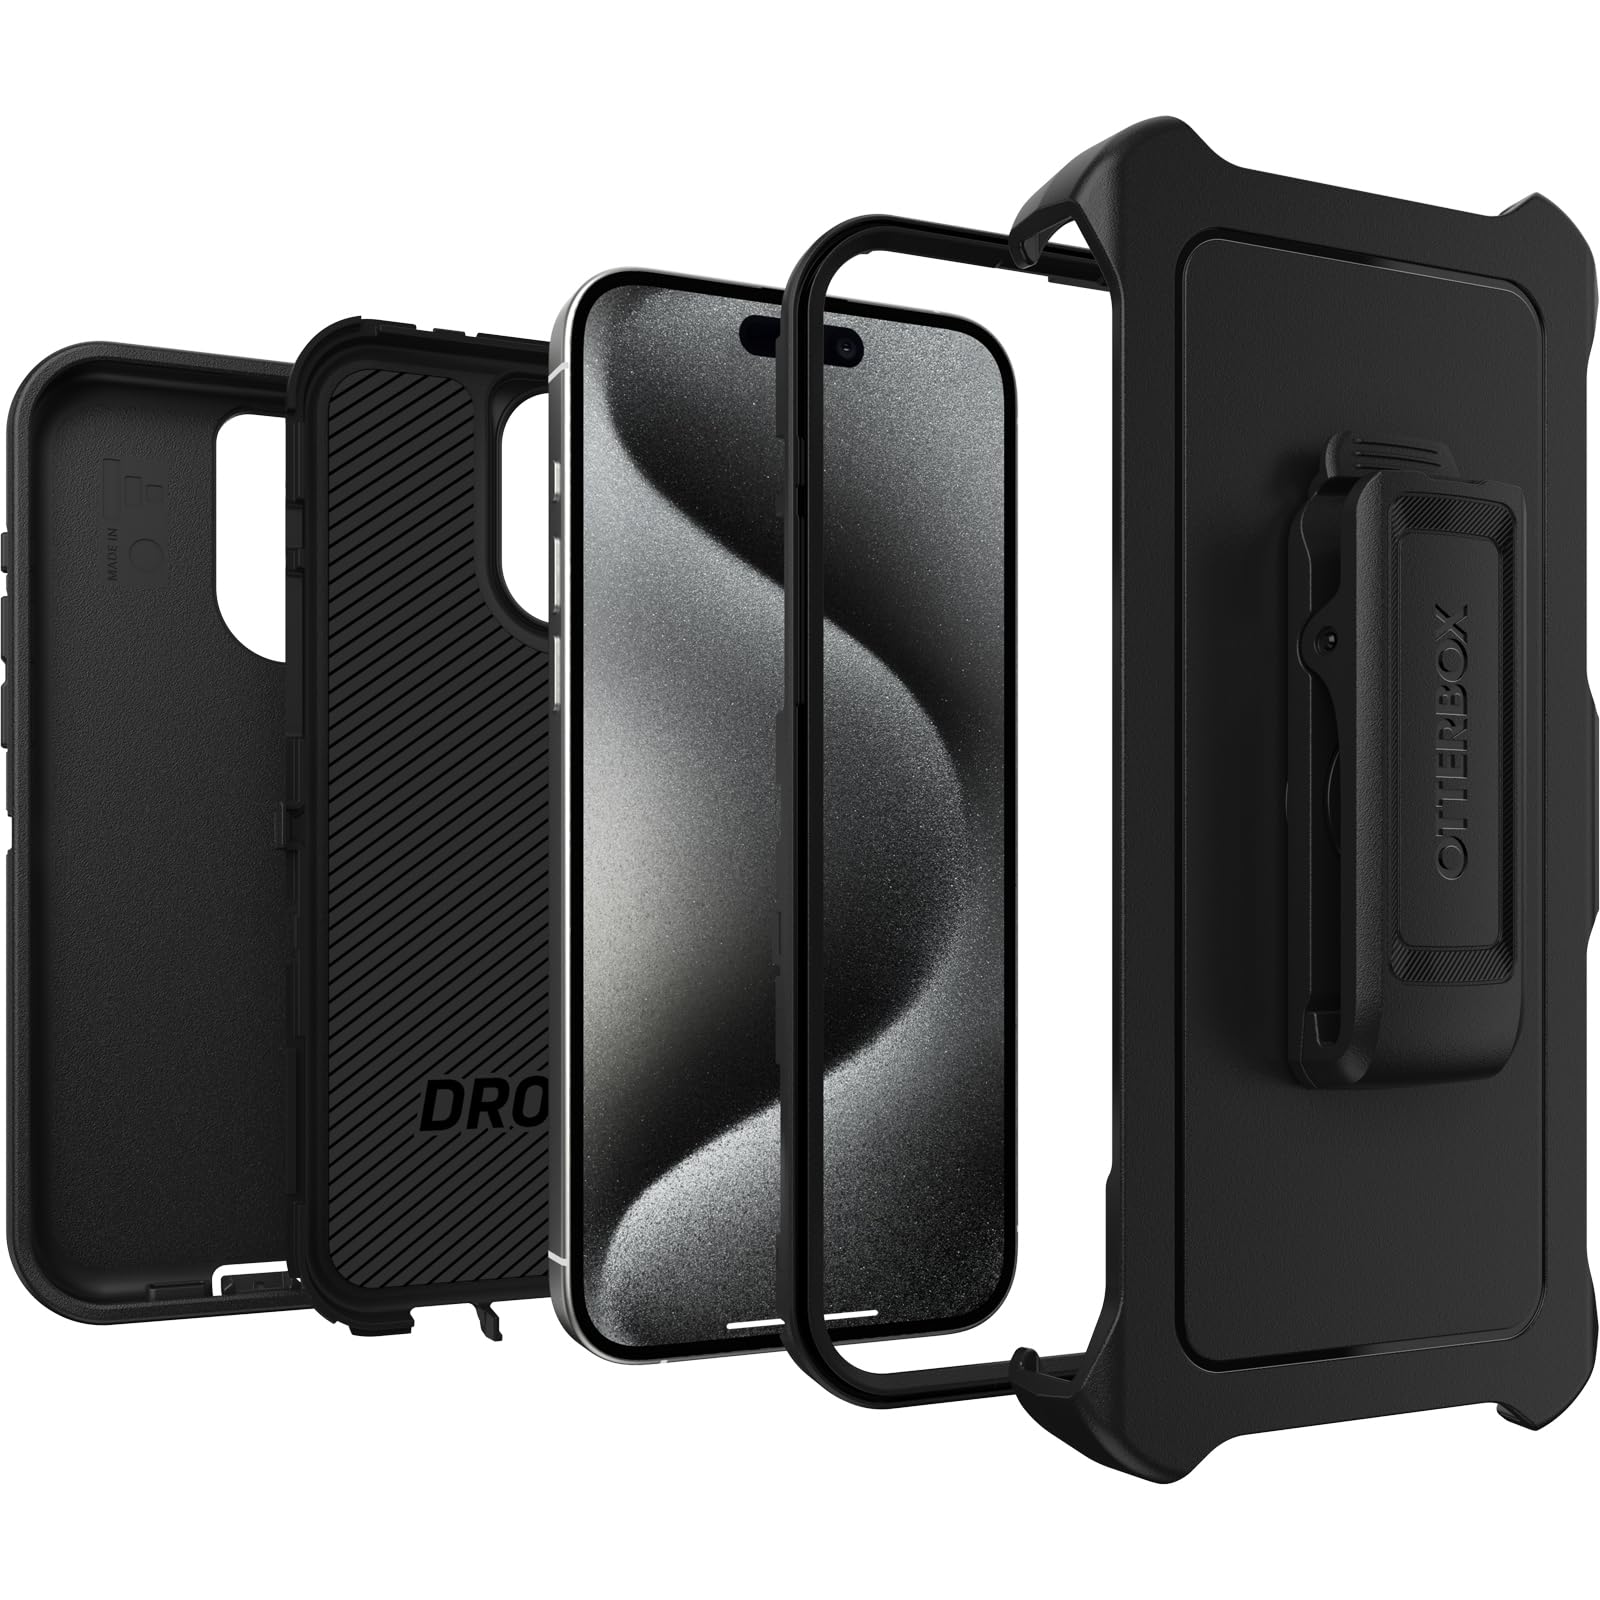 OtterBox iPhone 15 Pro MAX (Only) Defender Series Case - BLACK, screenless, rugged & durable, with port protection, includes holster clip kickstand